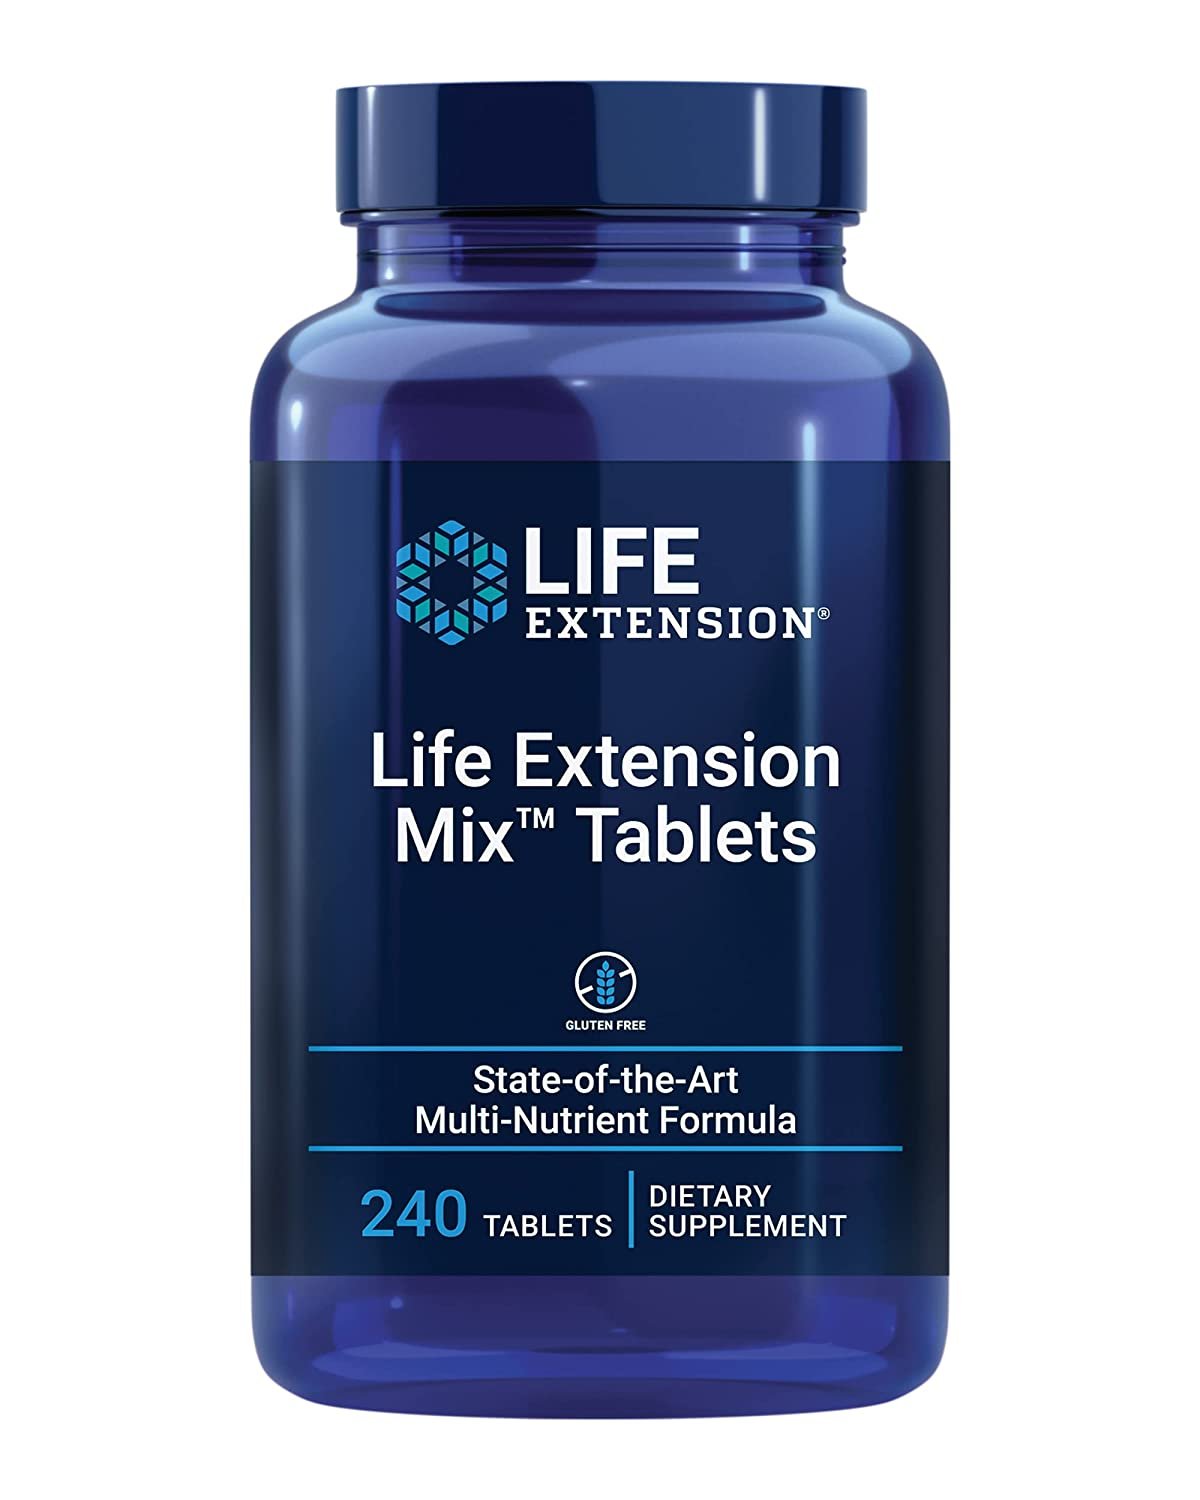 Life Extension Mix Tablets - High-potency Vitamin, Mineral, Fruit And Vegetable Supplement - Complete Daily Veggies Blend Pills For Whole Body Health, Immunity & Longevity - Gluten Free - 240 Tablets